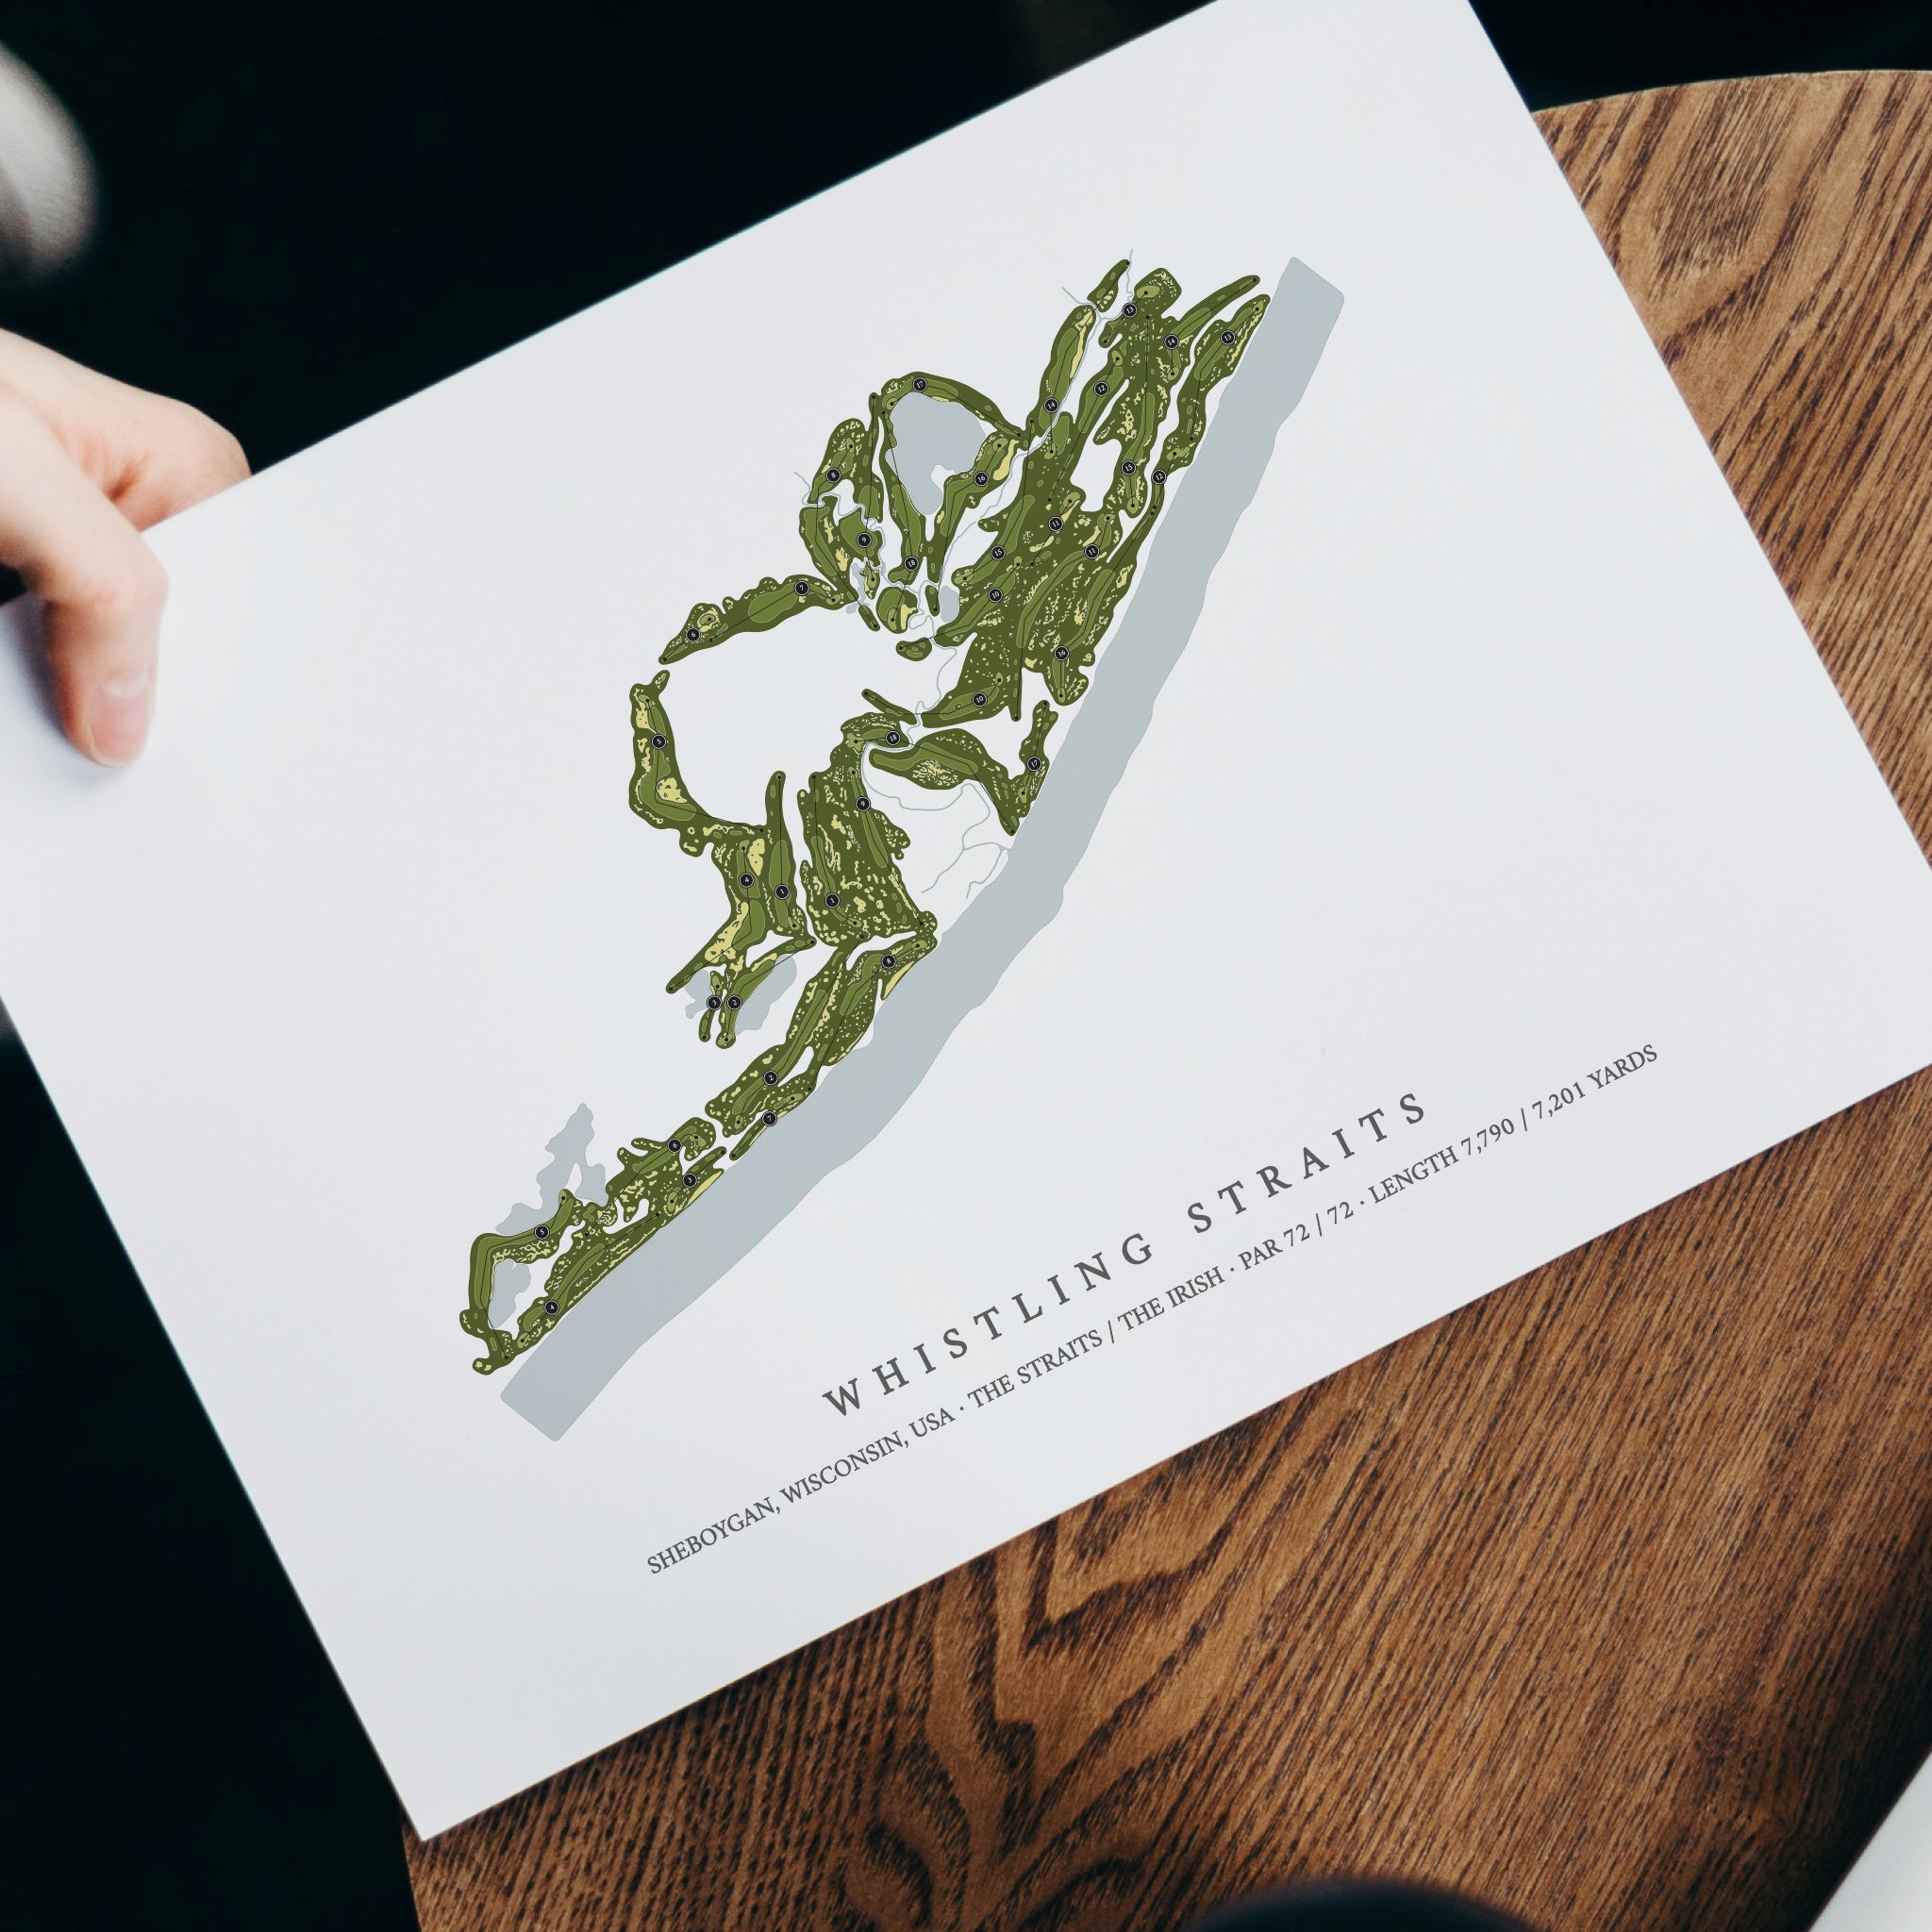 Whistling Straits | Golf Course Print | With Laptop 